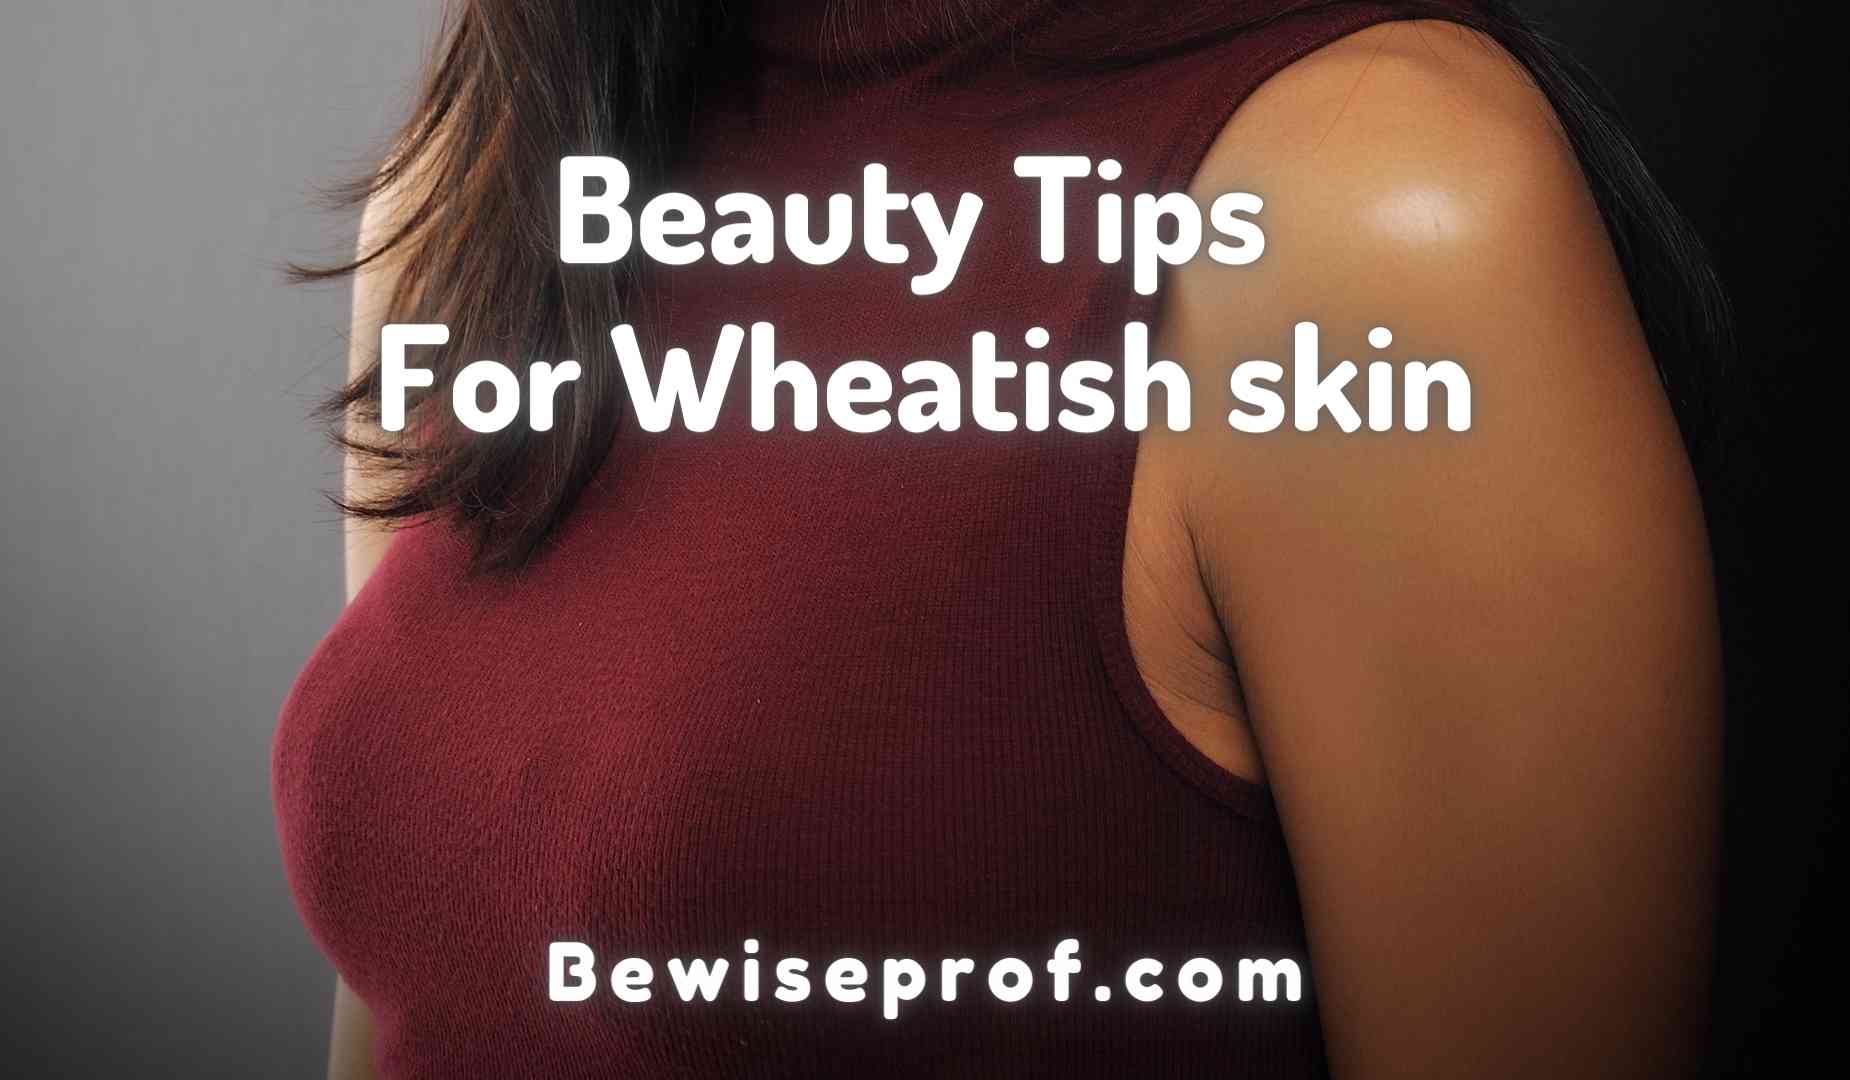 Beauty Tips For Wheatish skin And The Best Match You Need To Know